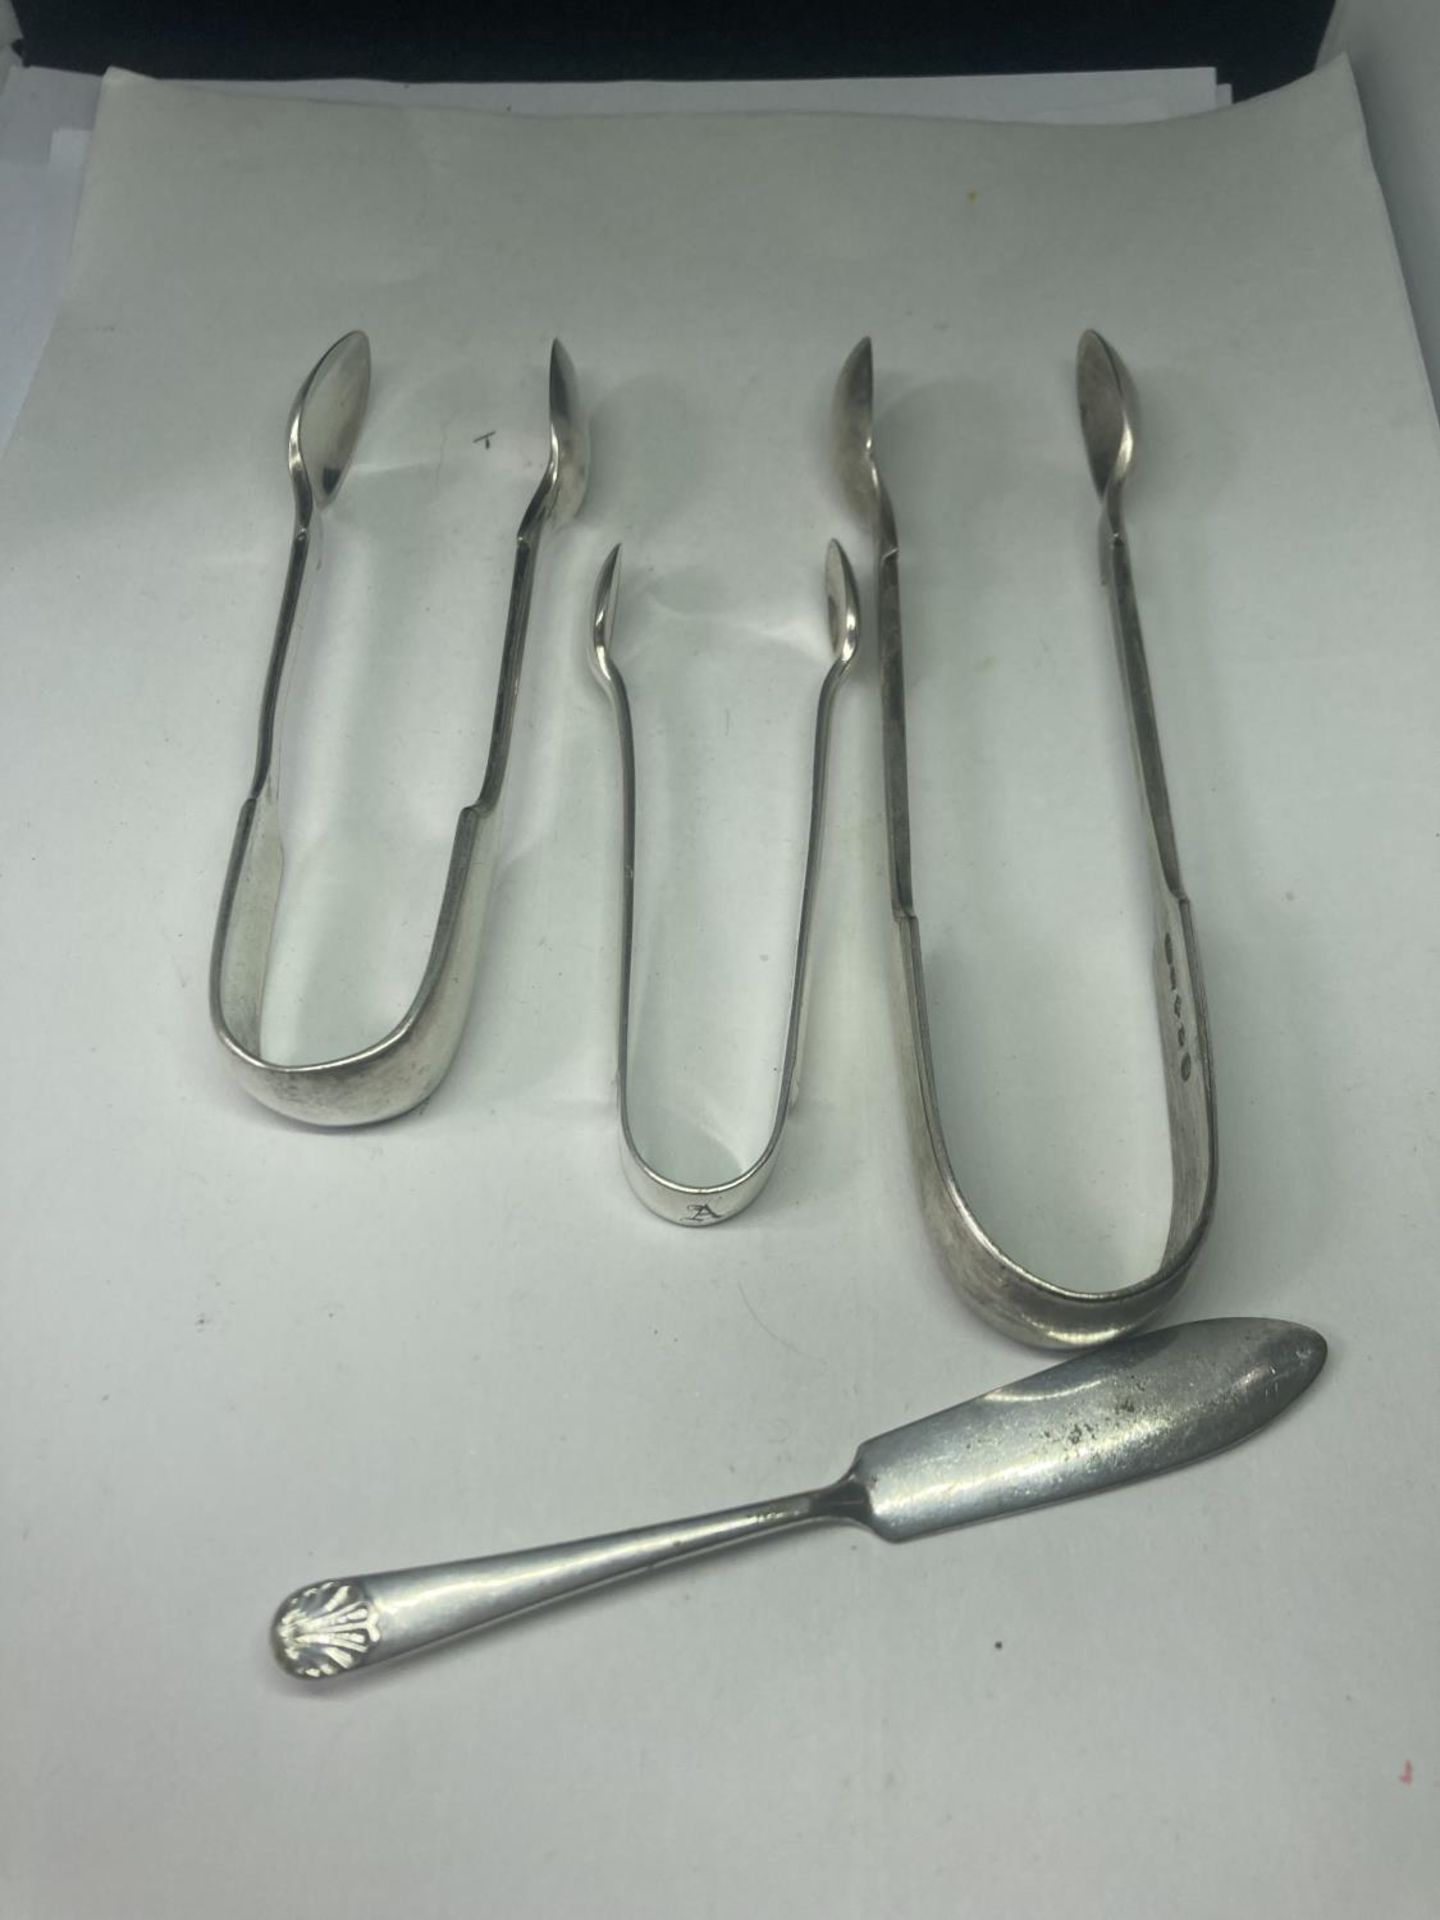 FOUE SILVER PLATED ITEMS TO INCLUDE THREE SETS OF NIPS AND A BUTTER KNIFE